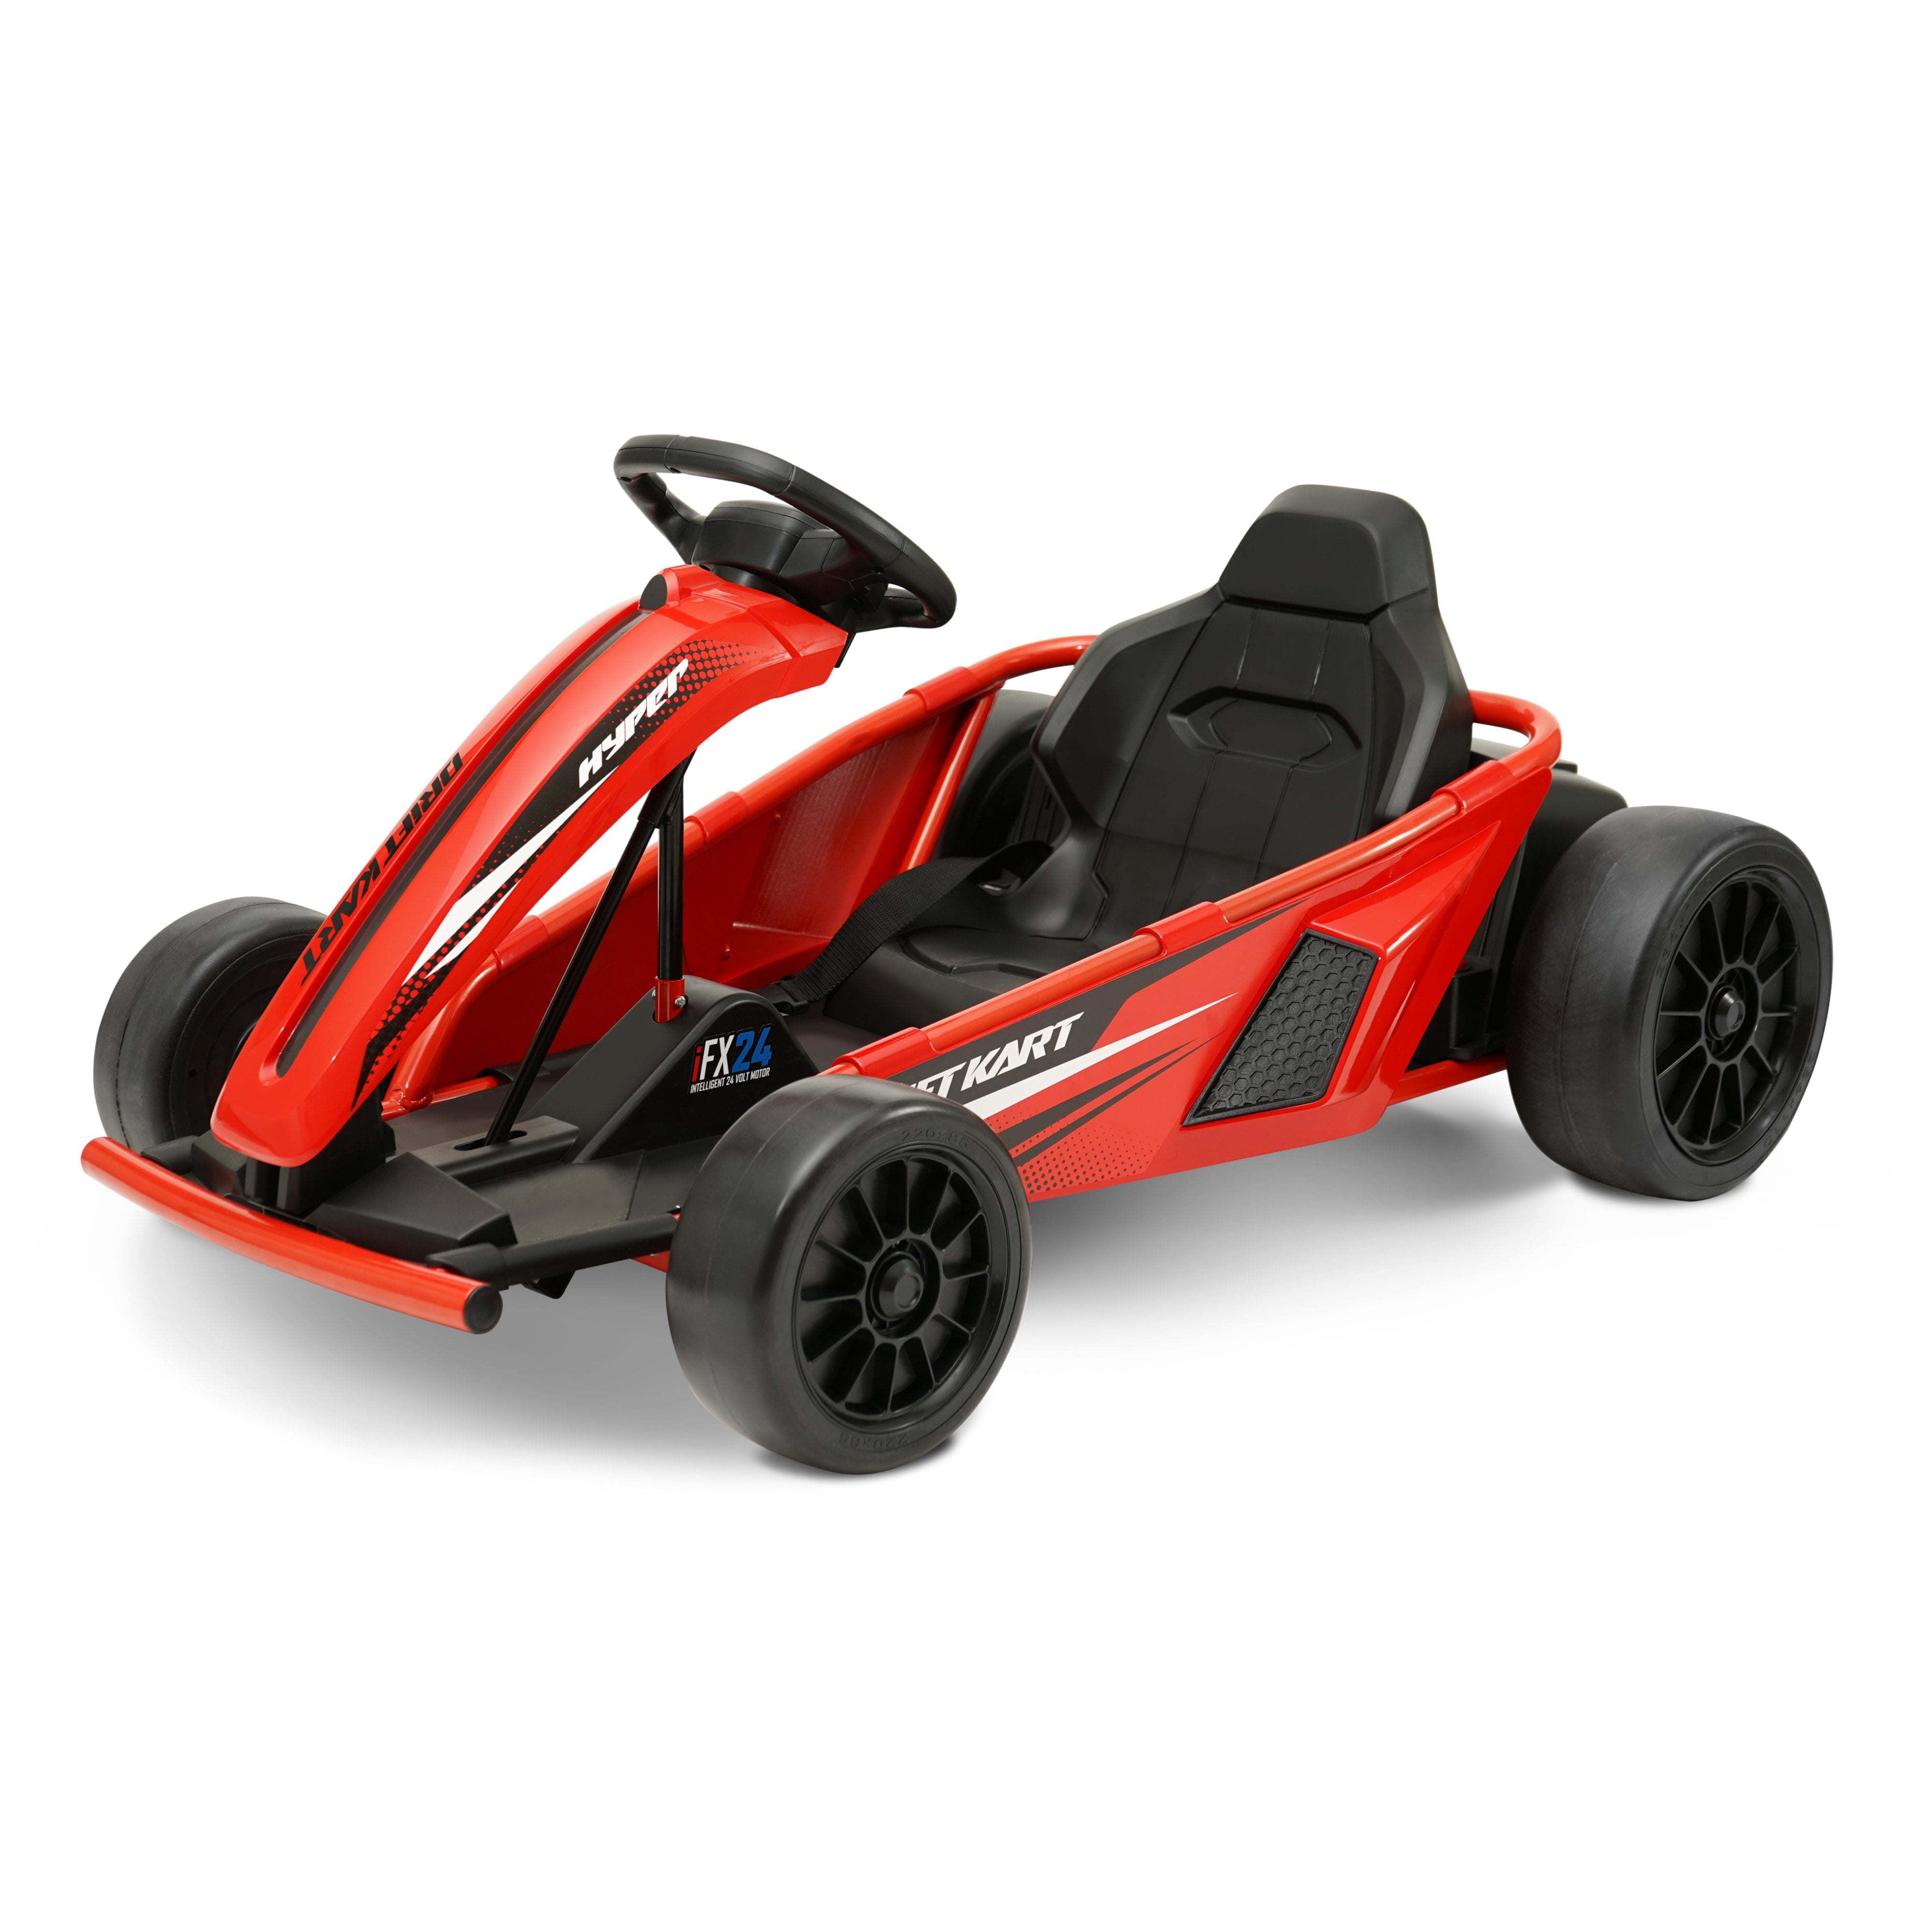 Hyper Toys 24V Go Kart Ride On, Red, Recommended for Ages 8 to 14 Years